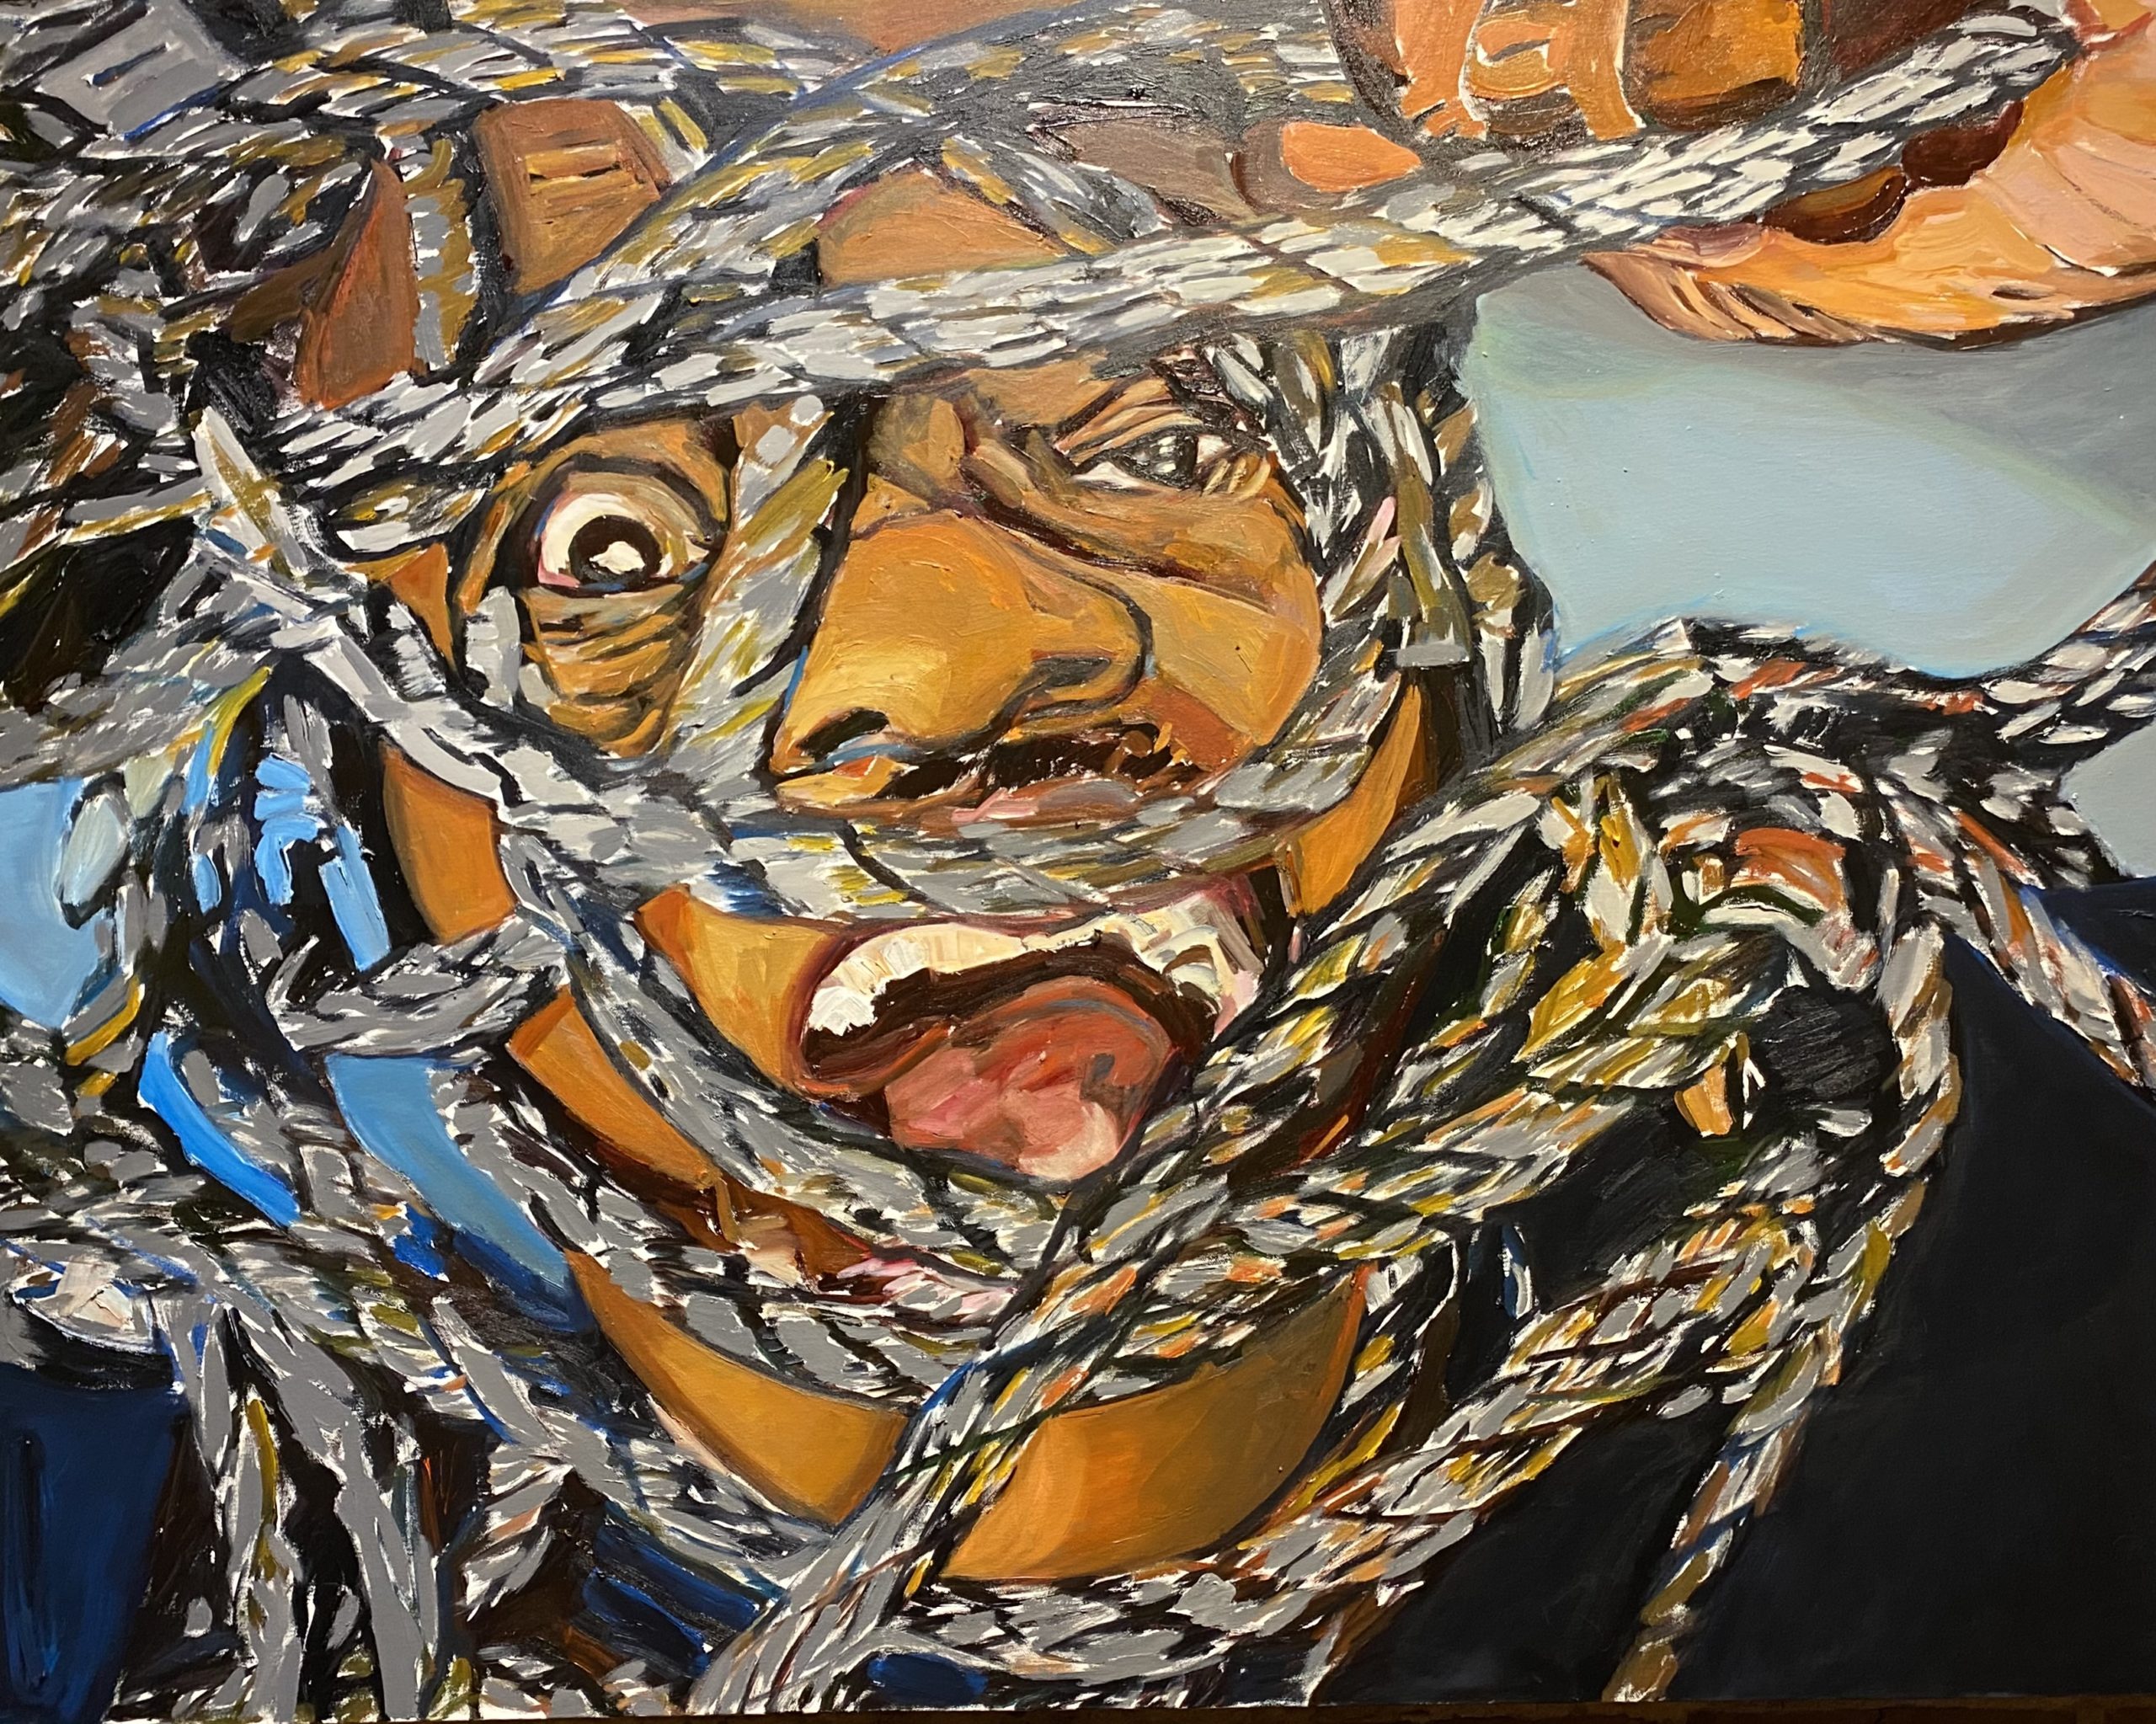 Lonnie Screaming by Beverly McIver oil on canvas  36 x 48   45,000